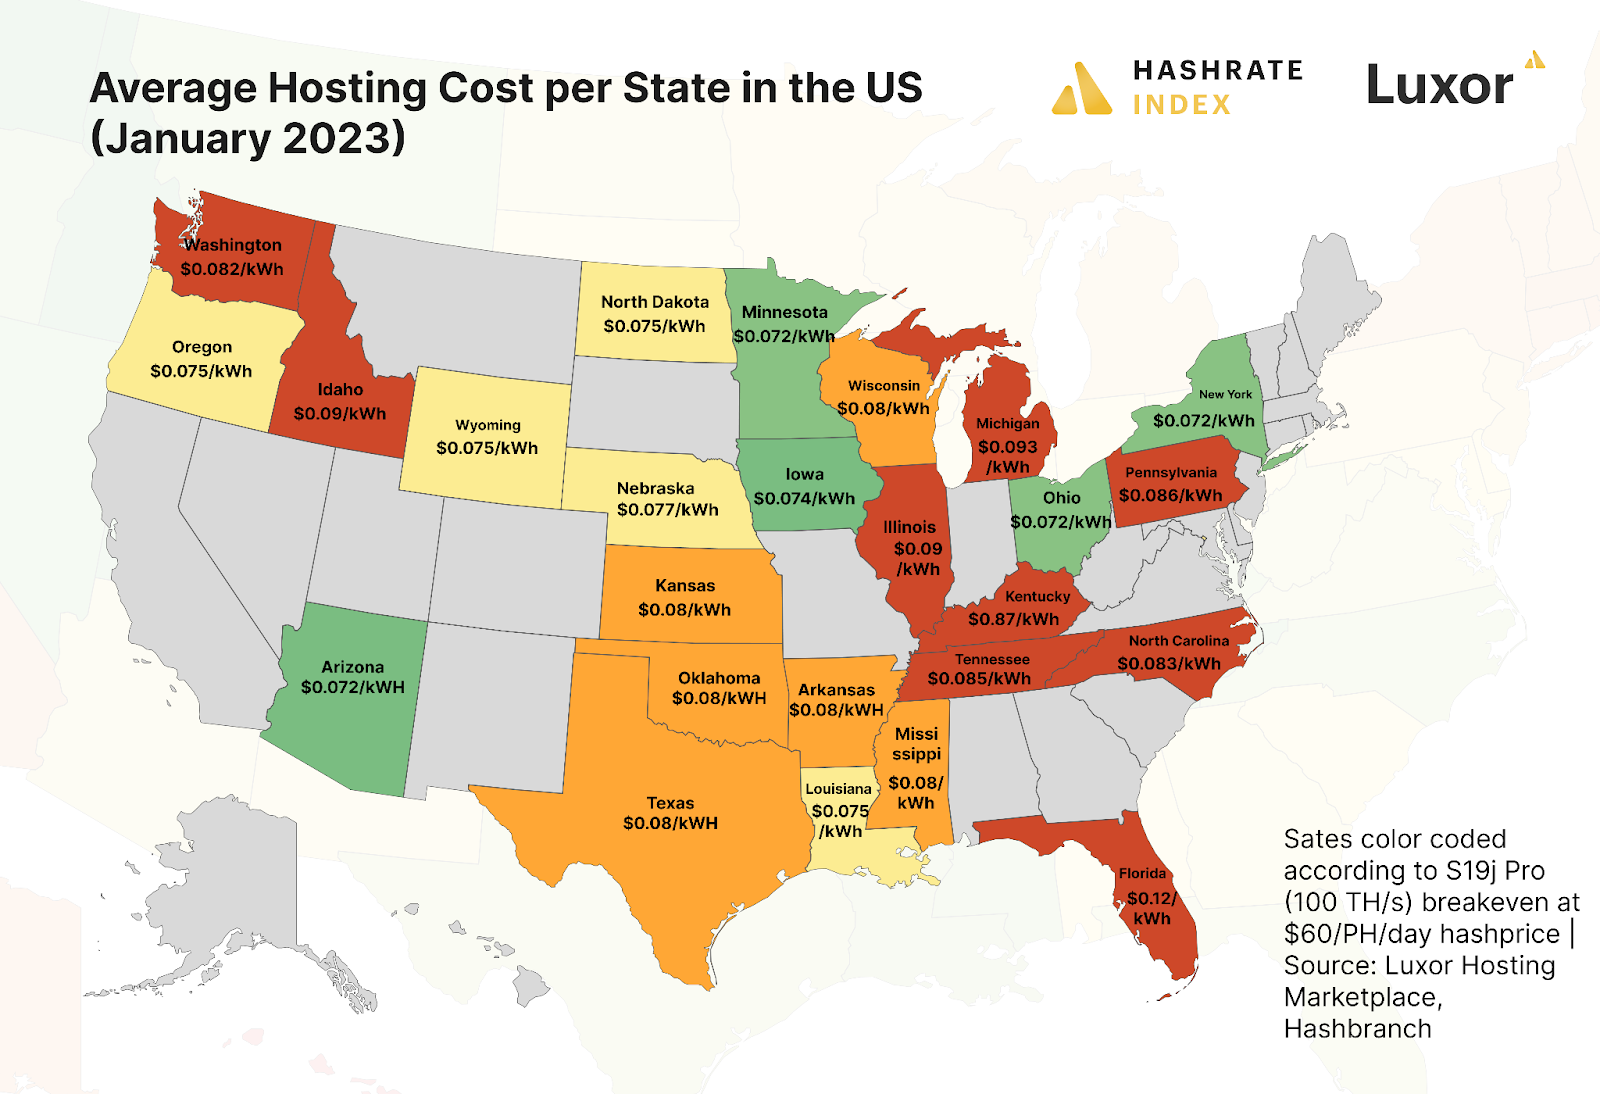 Average bitcoin mining hosting cost in the US per Luxor and Hashbranch data | Source: Luxor Hosting Marketplace, Hashbranch